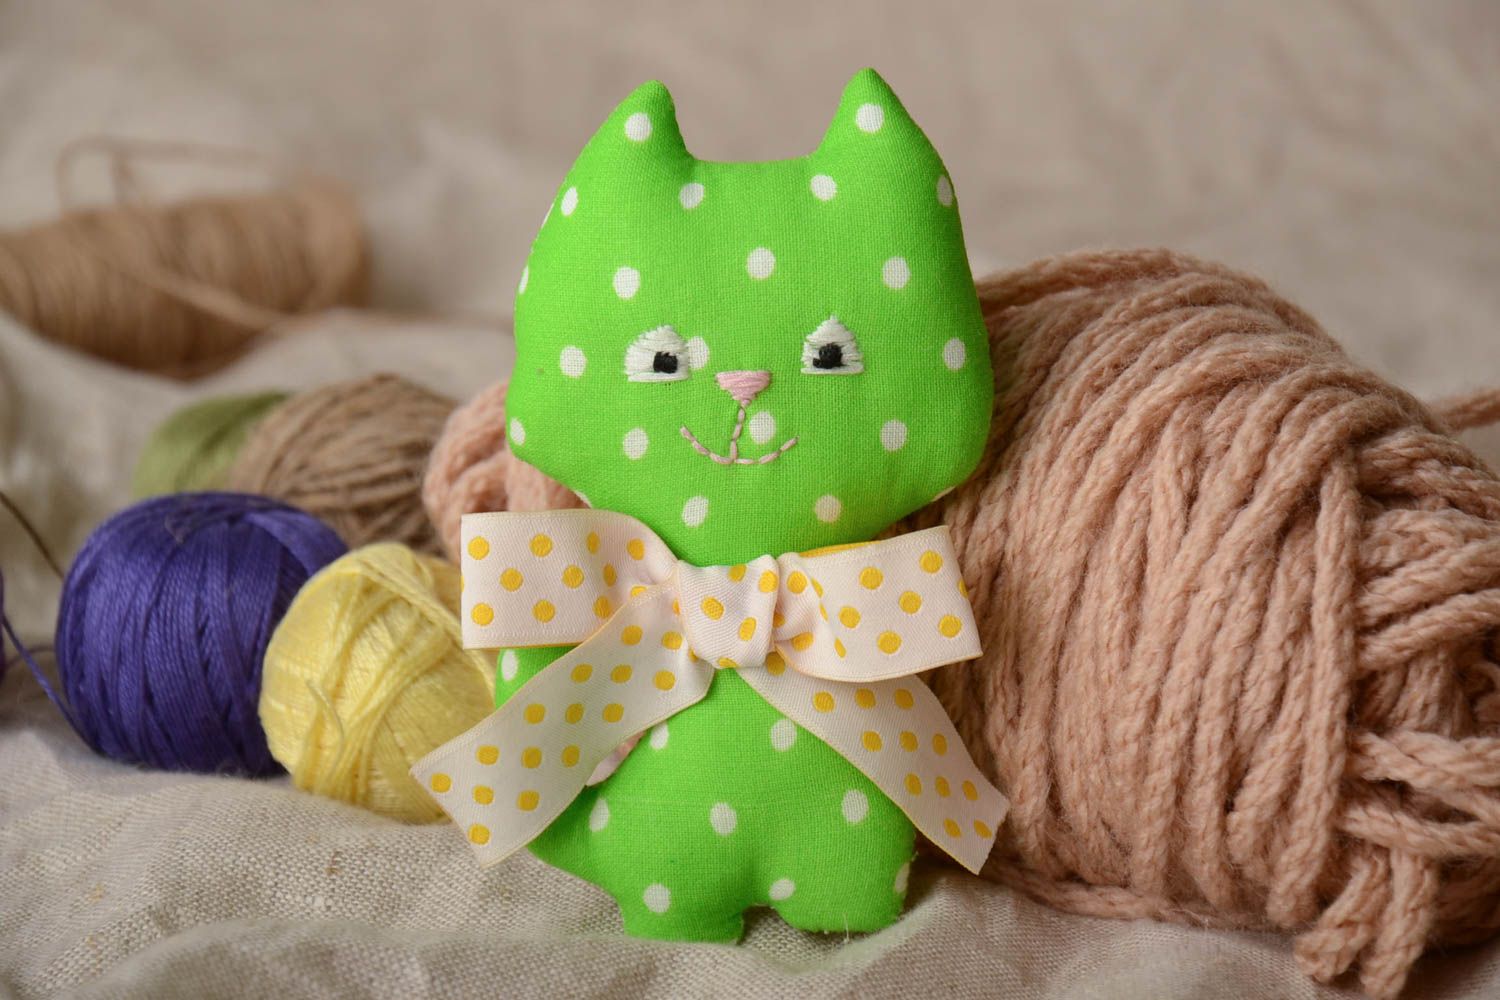 Handmade decorative calico soft toy little green cat with polka dot pattern photo 1